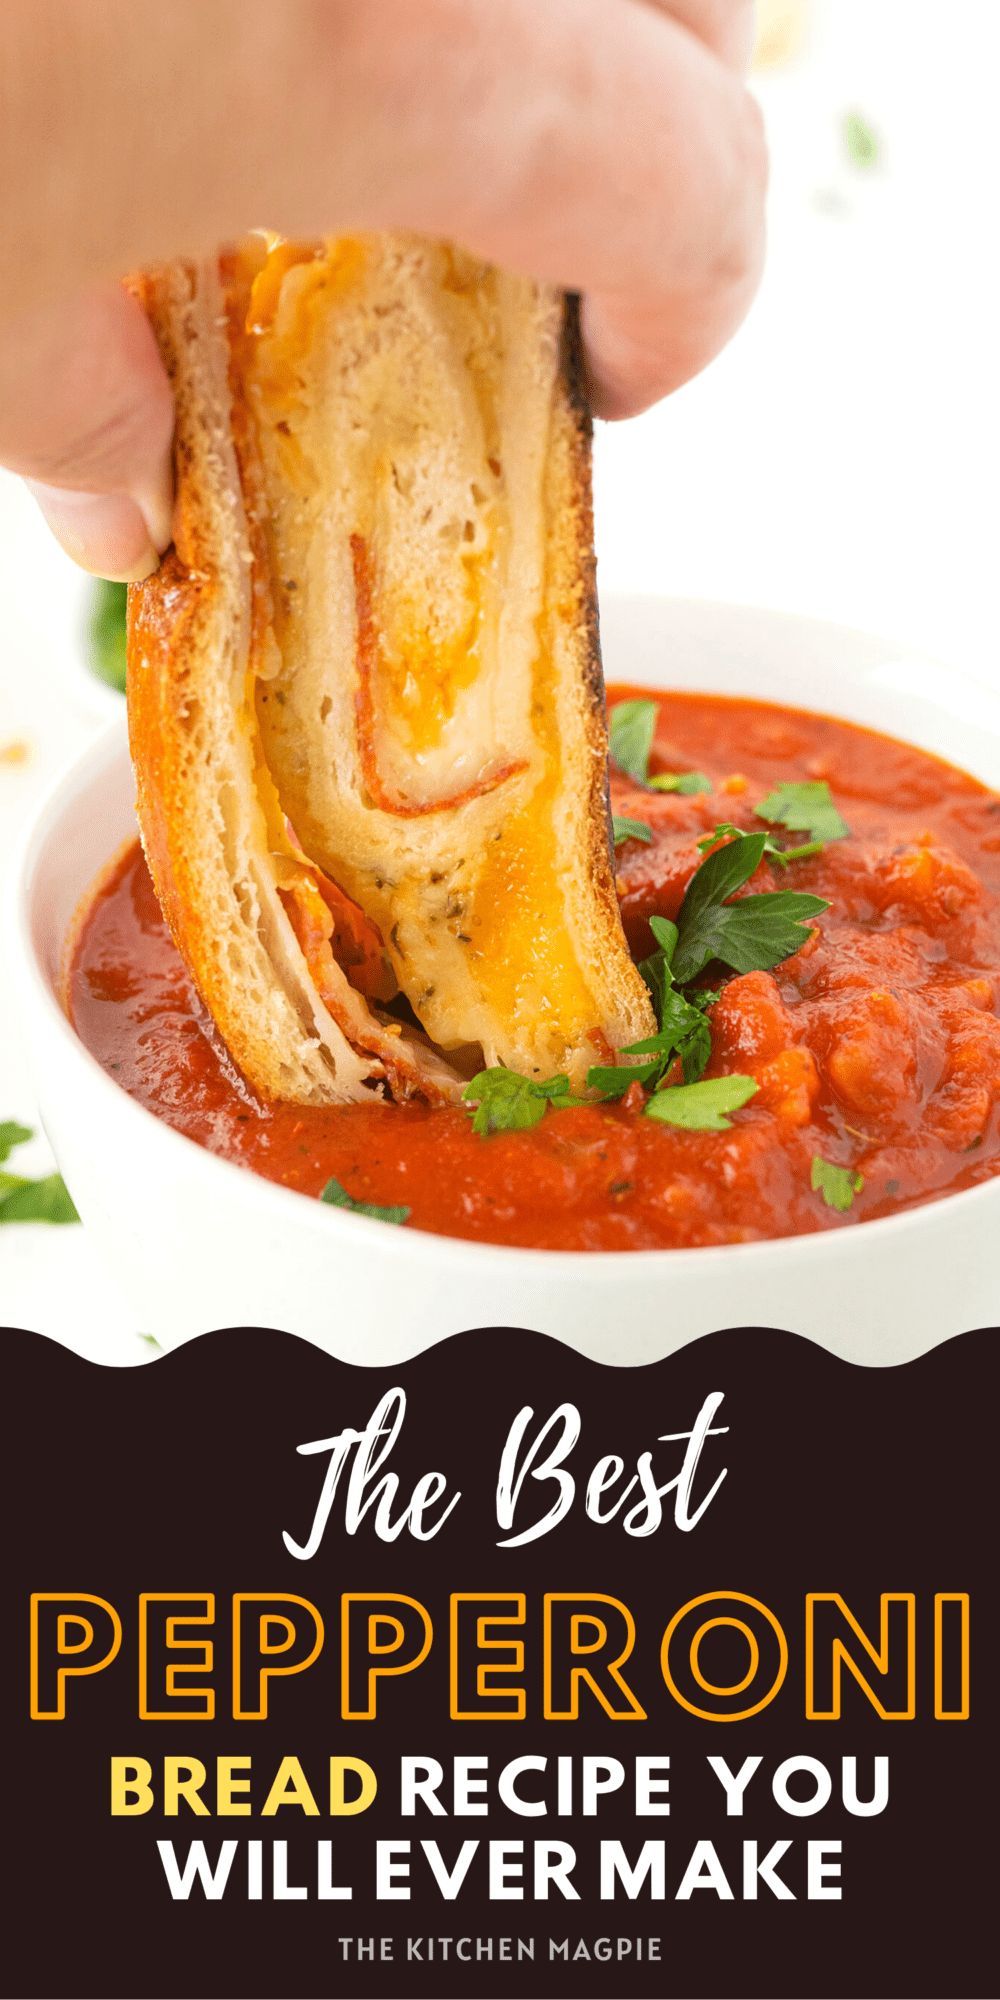 Hot pepperoni and melted cheese are baked into swirls in a loaf of white bread, sliced, and served warm. An excellent appetizer or snack the whole family will love!